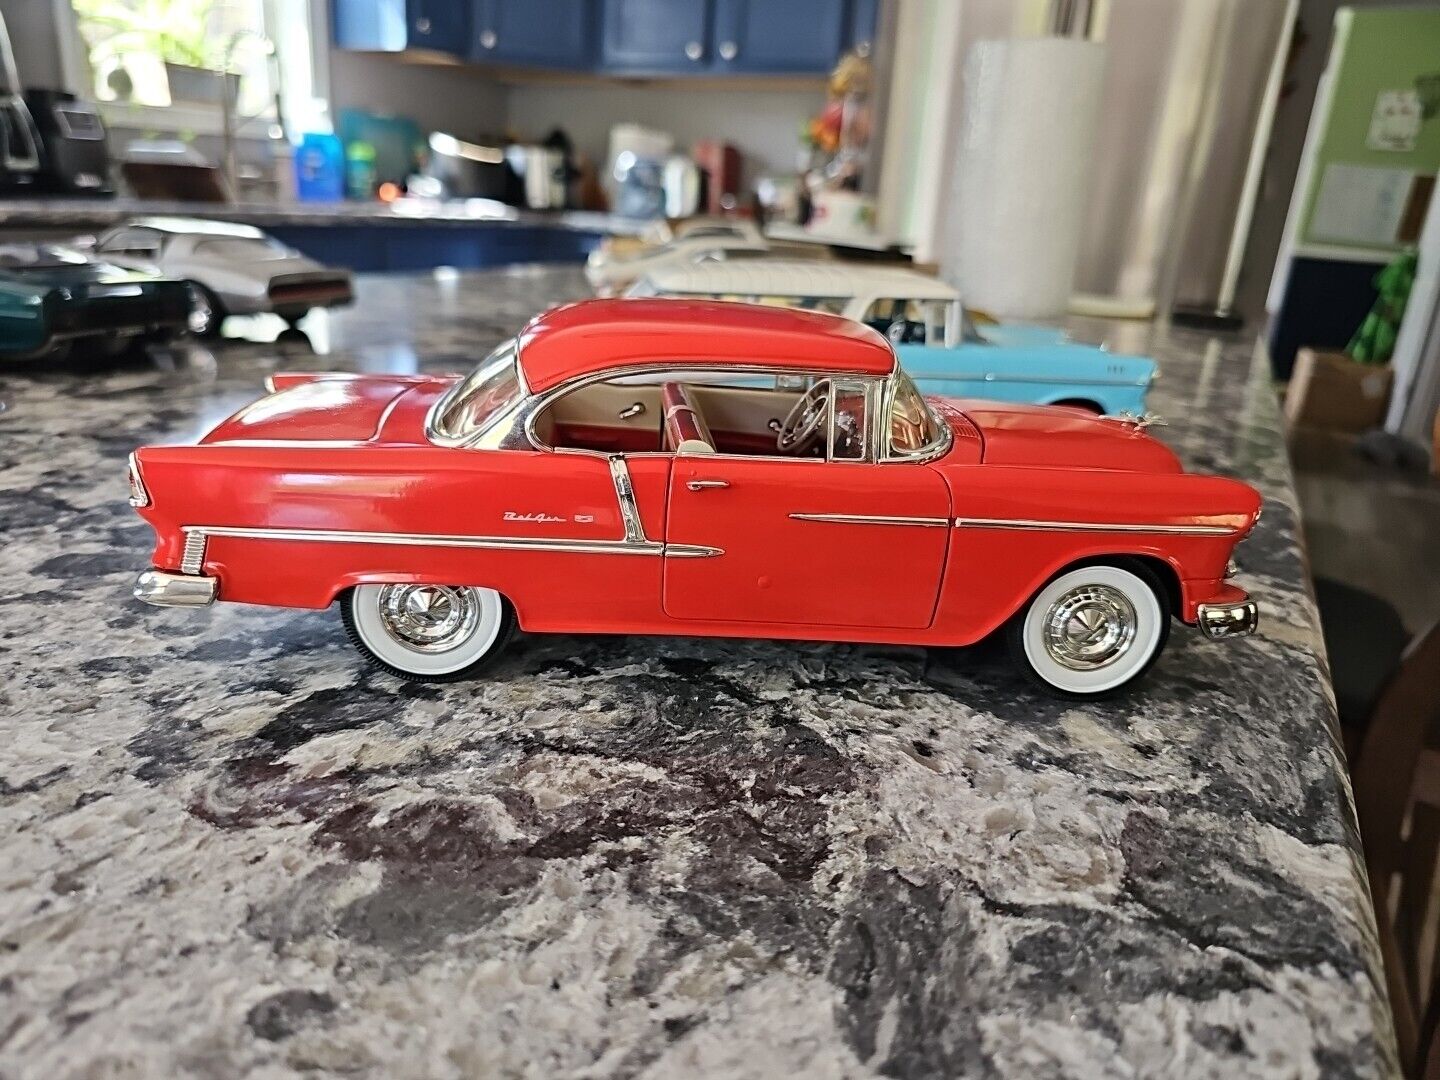 ERTL Collectibles American Muscle  1955 Chevrolet Bel Air  Red  1:18 Diecast